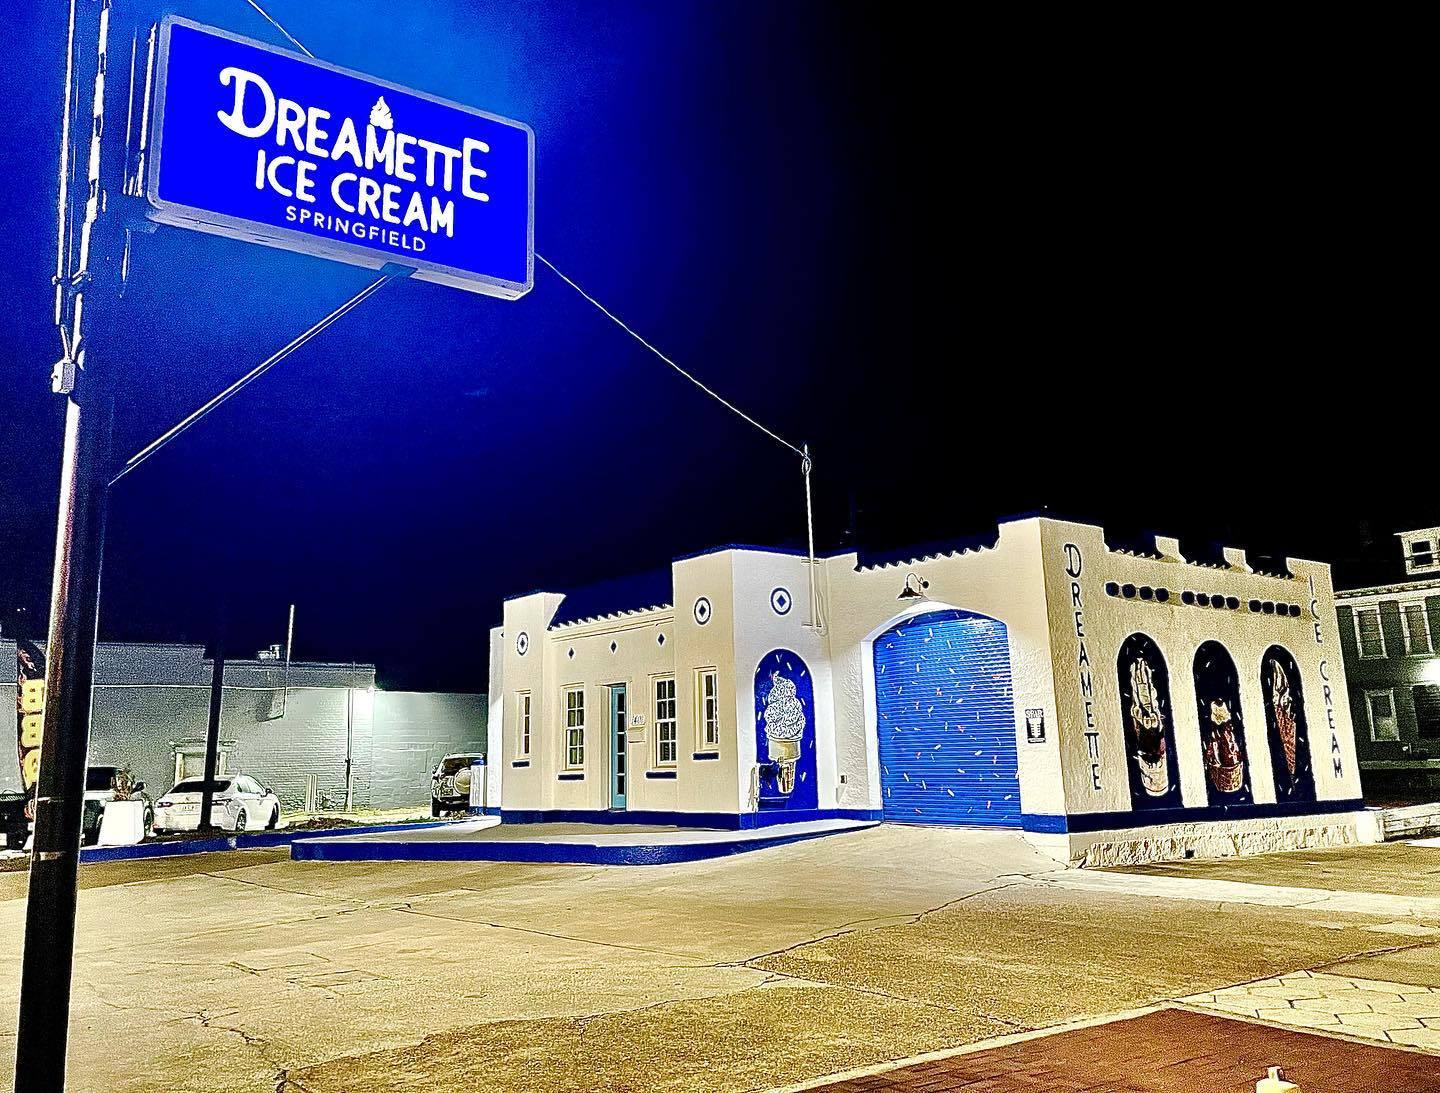 Dreamette Ice Cream Springfield could open in eight weeks at 1401 N. Main St.